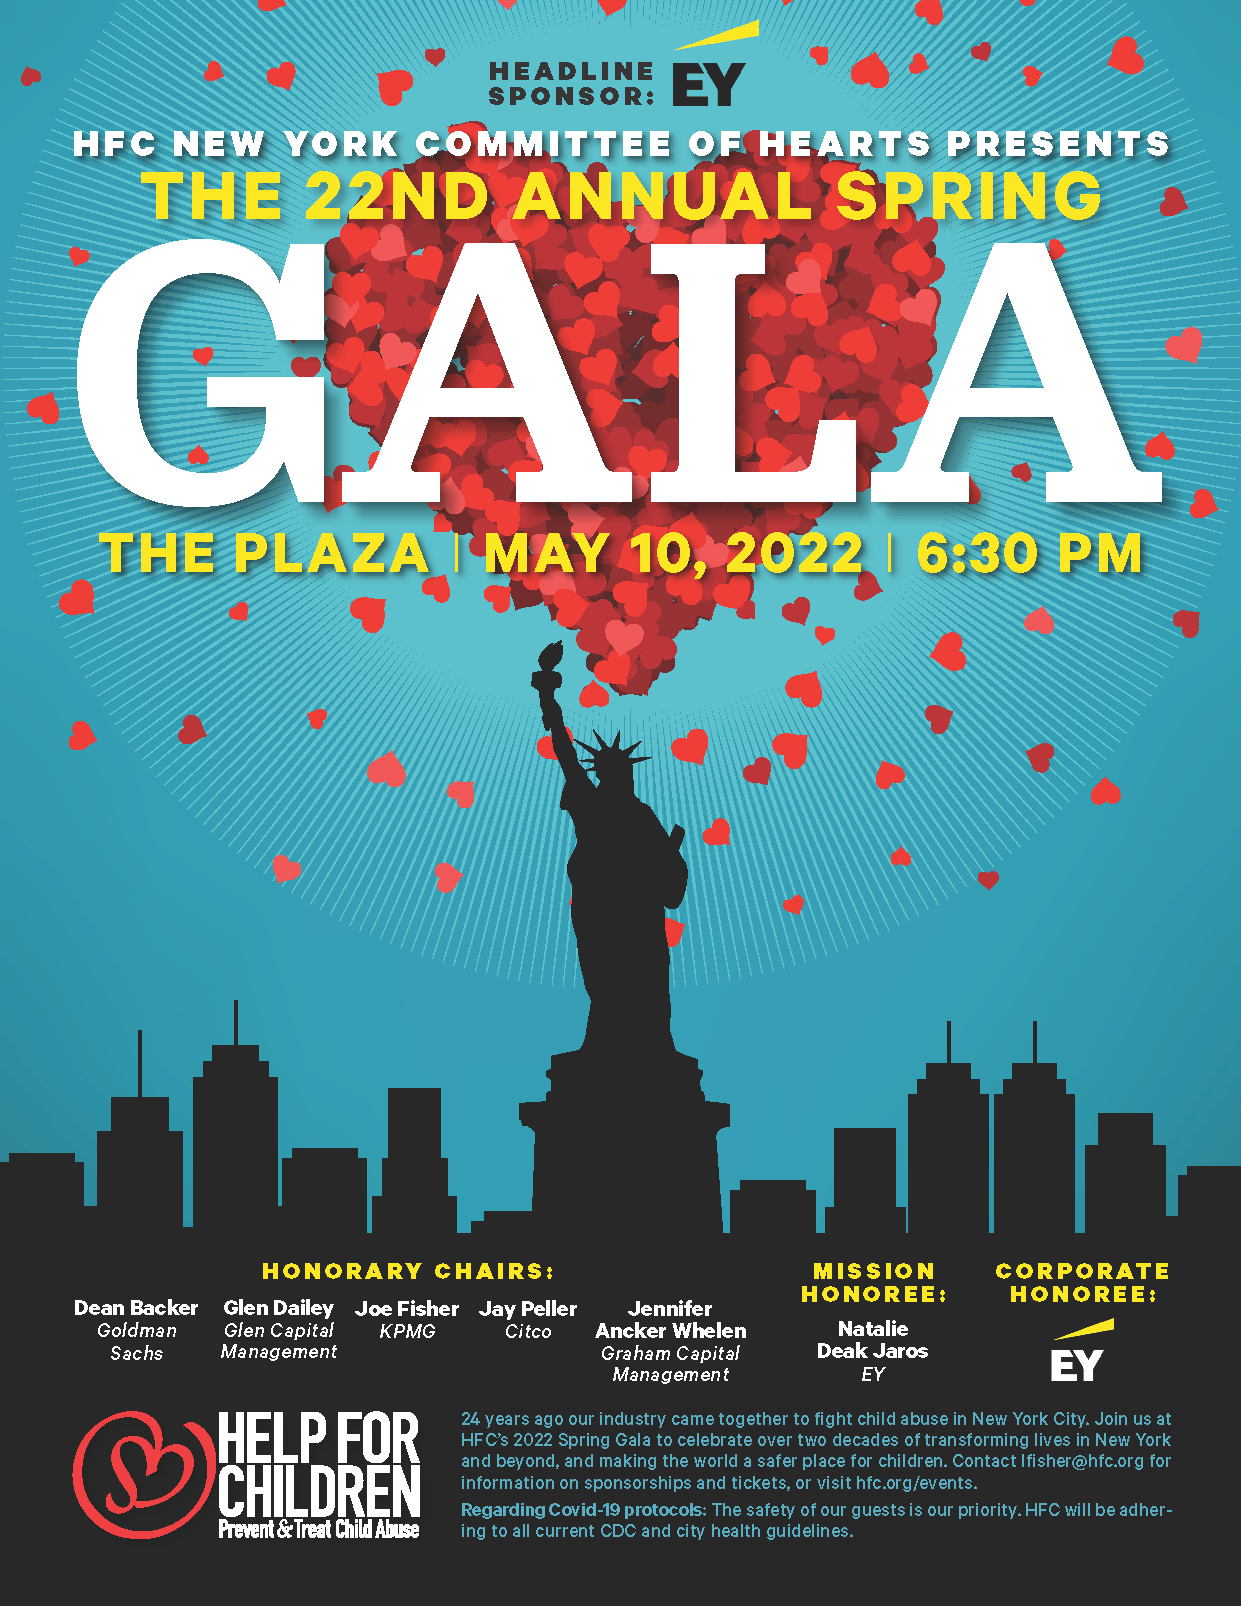 The Alternative Investment Industry in New York Reunited at The Plaza to Support the Most Effective Child Abuse Prevention and Treatment Programs in the Greater New York Metropolitan Area HELP FOR CHILDREN’S 22ND ANNUAL SPRING GALA HONORED EY AND NATALIE DEAK JAROS